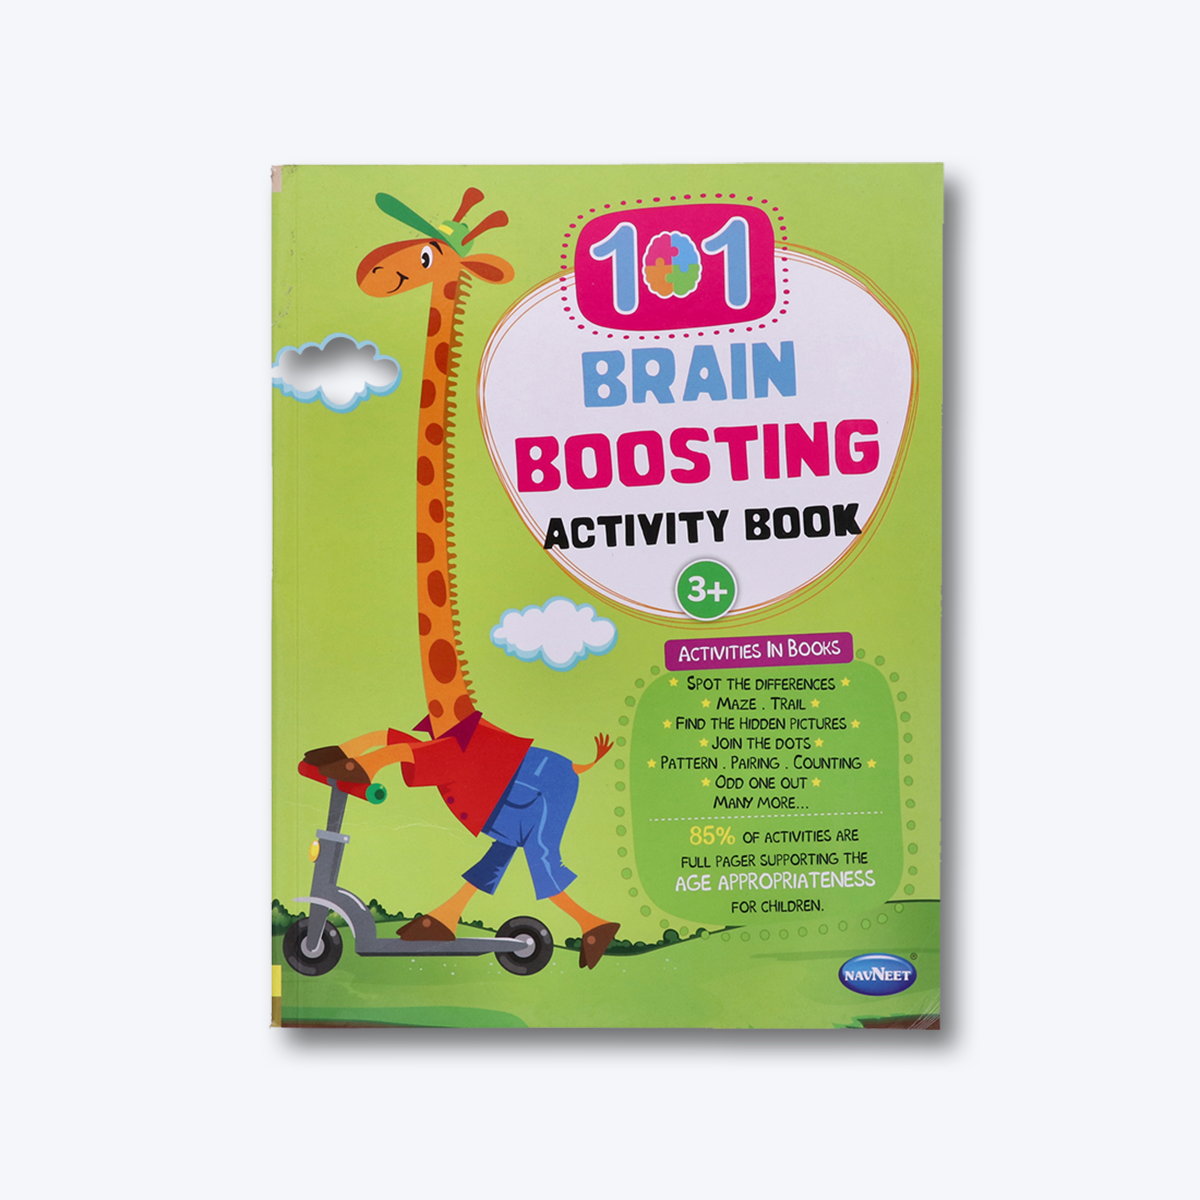 Navneet 101 Brain Boosting Activity Book- Preschool Kids- Age 3+, Logical reasoning, Best Brain teaser book- Fun activities - Maze, Hidden Picture, Puzzle, odd one out & more | 88 Pages